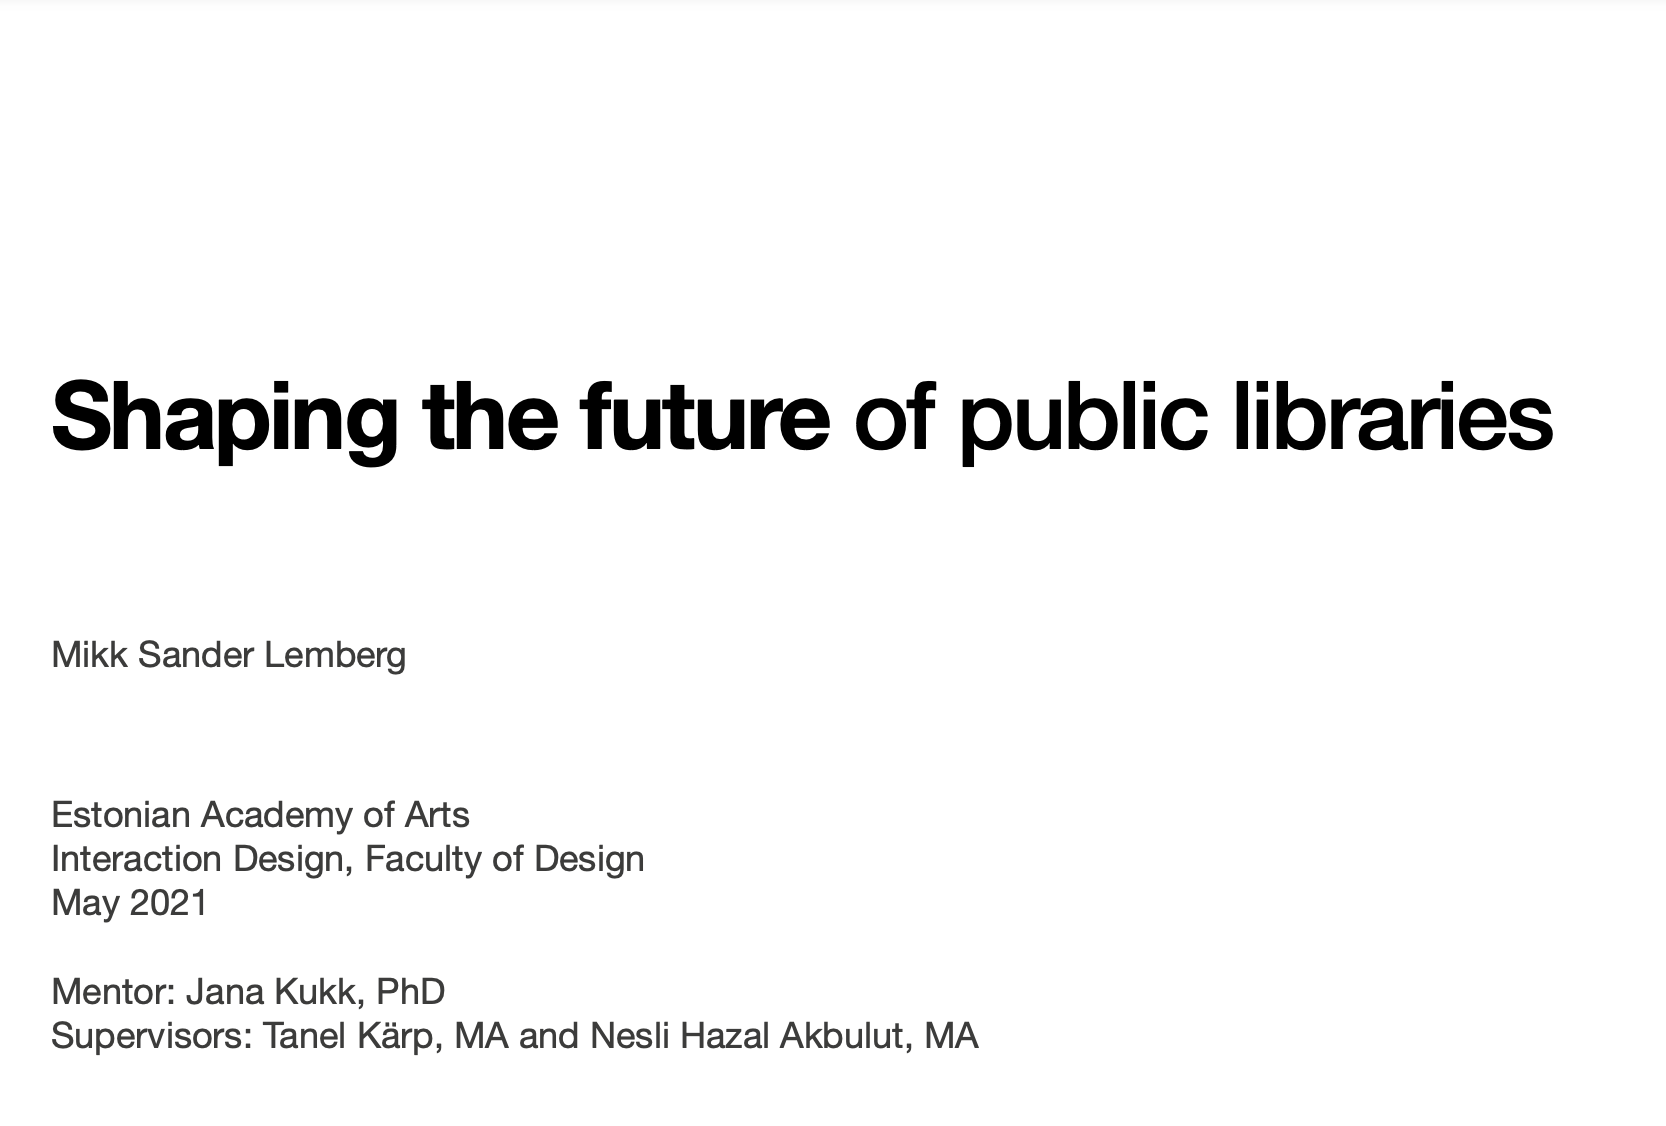 Shaping the future of public libraries